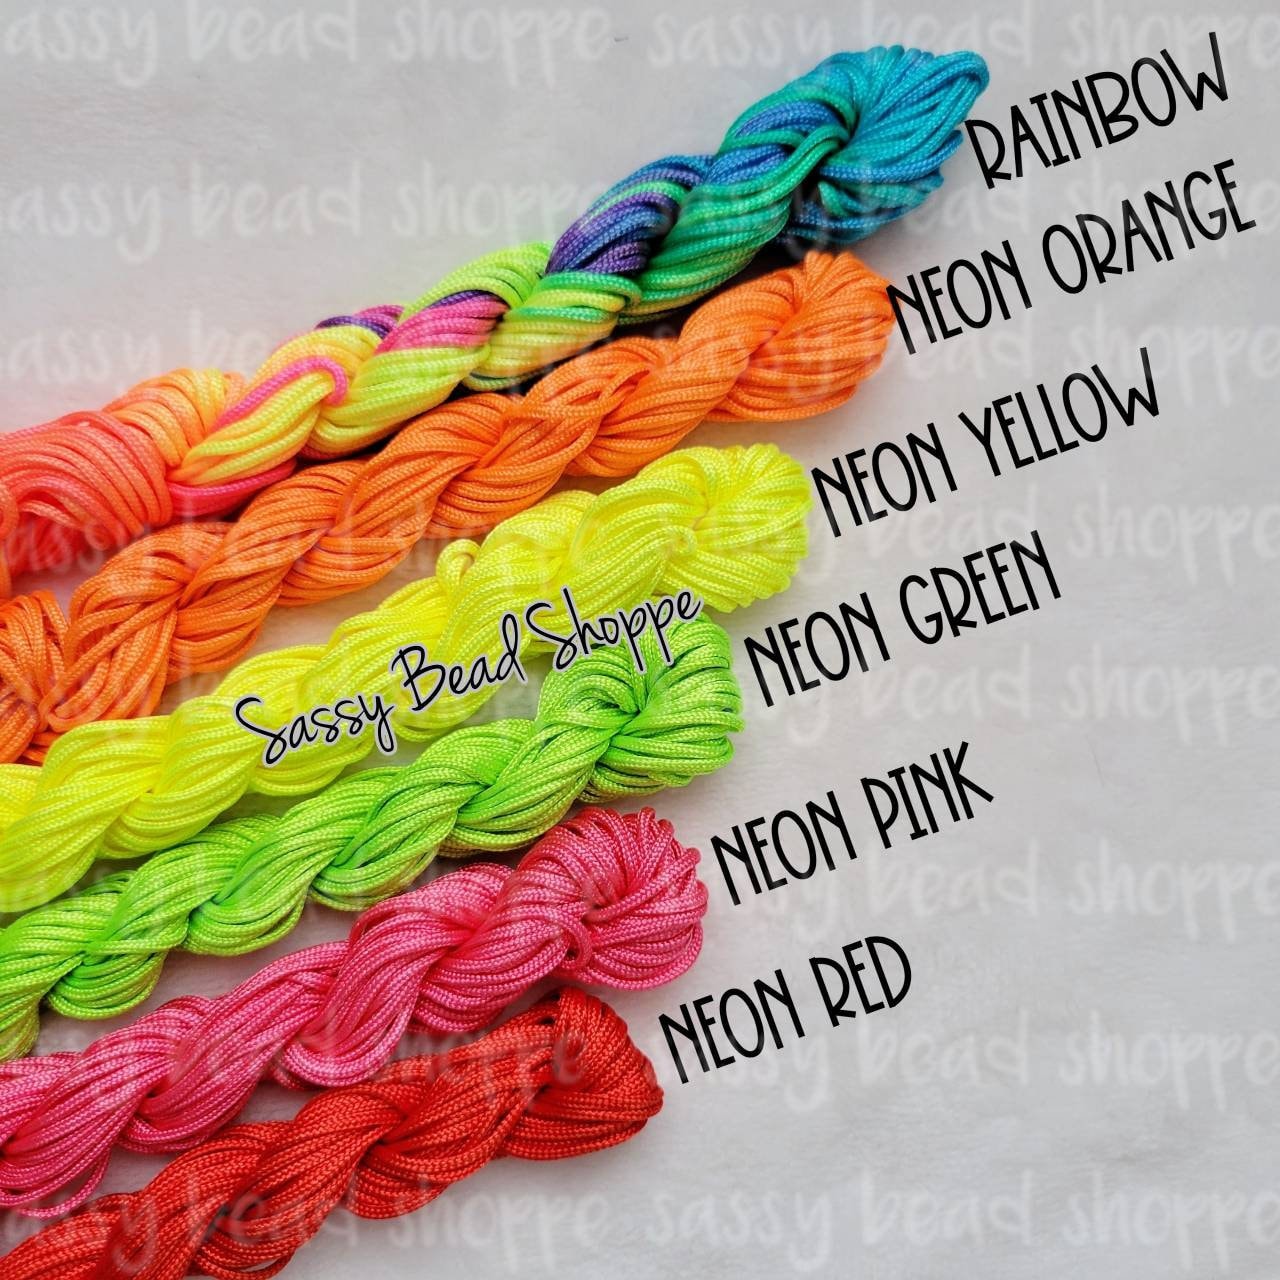 13 Yards of Nylon Cord, 2mm Multiple Neon Color Options – Sassy